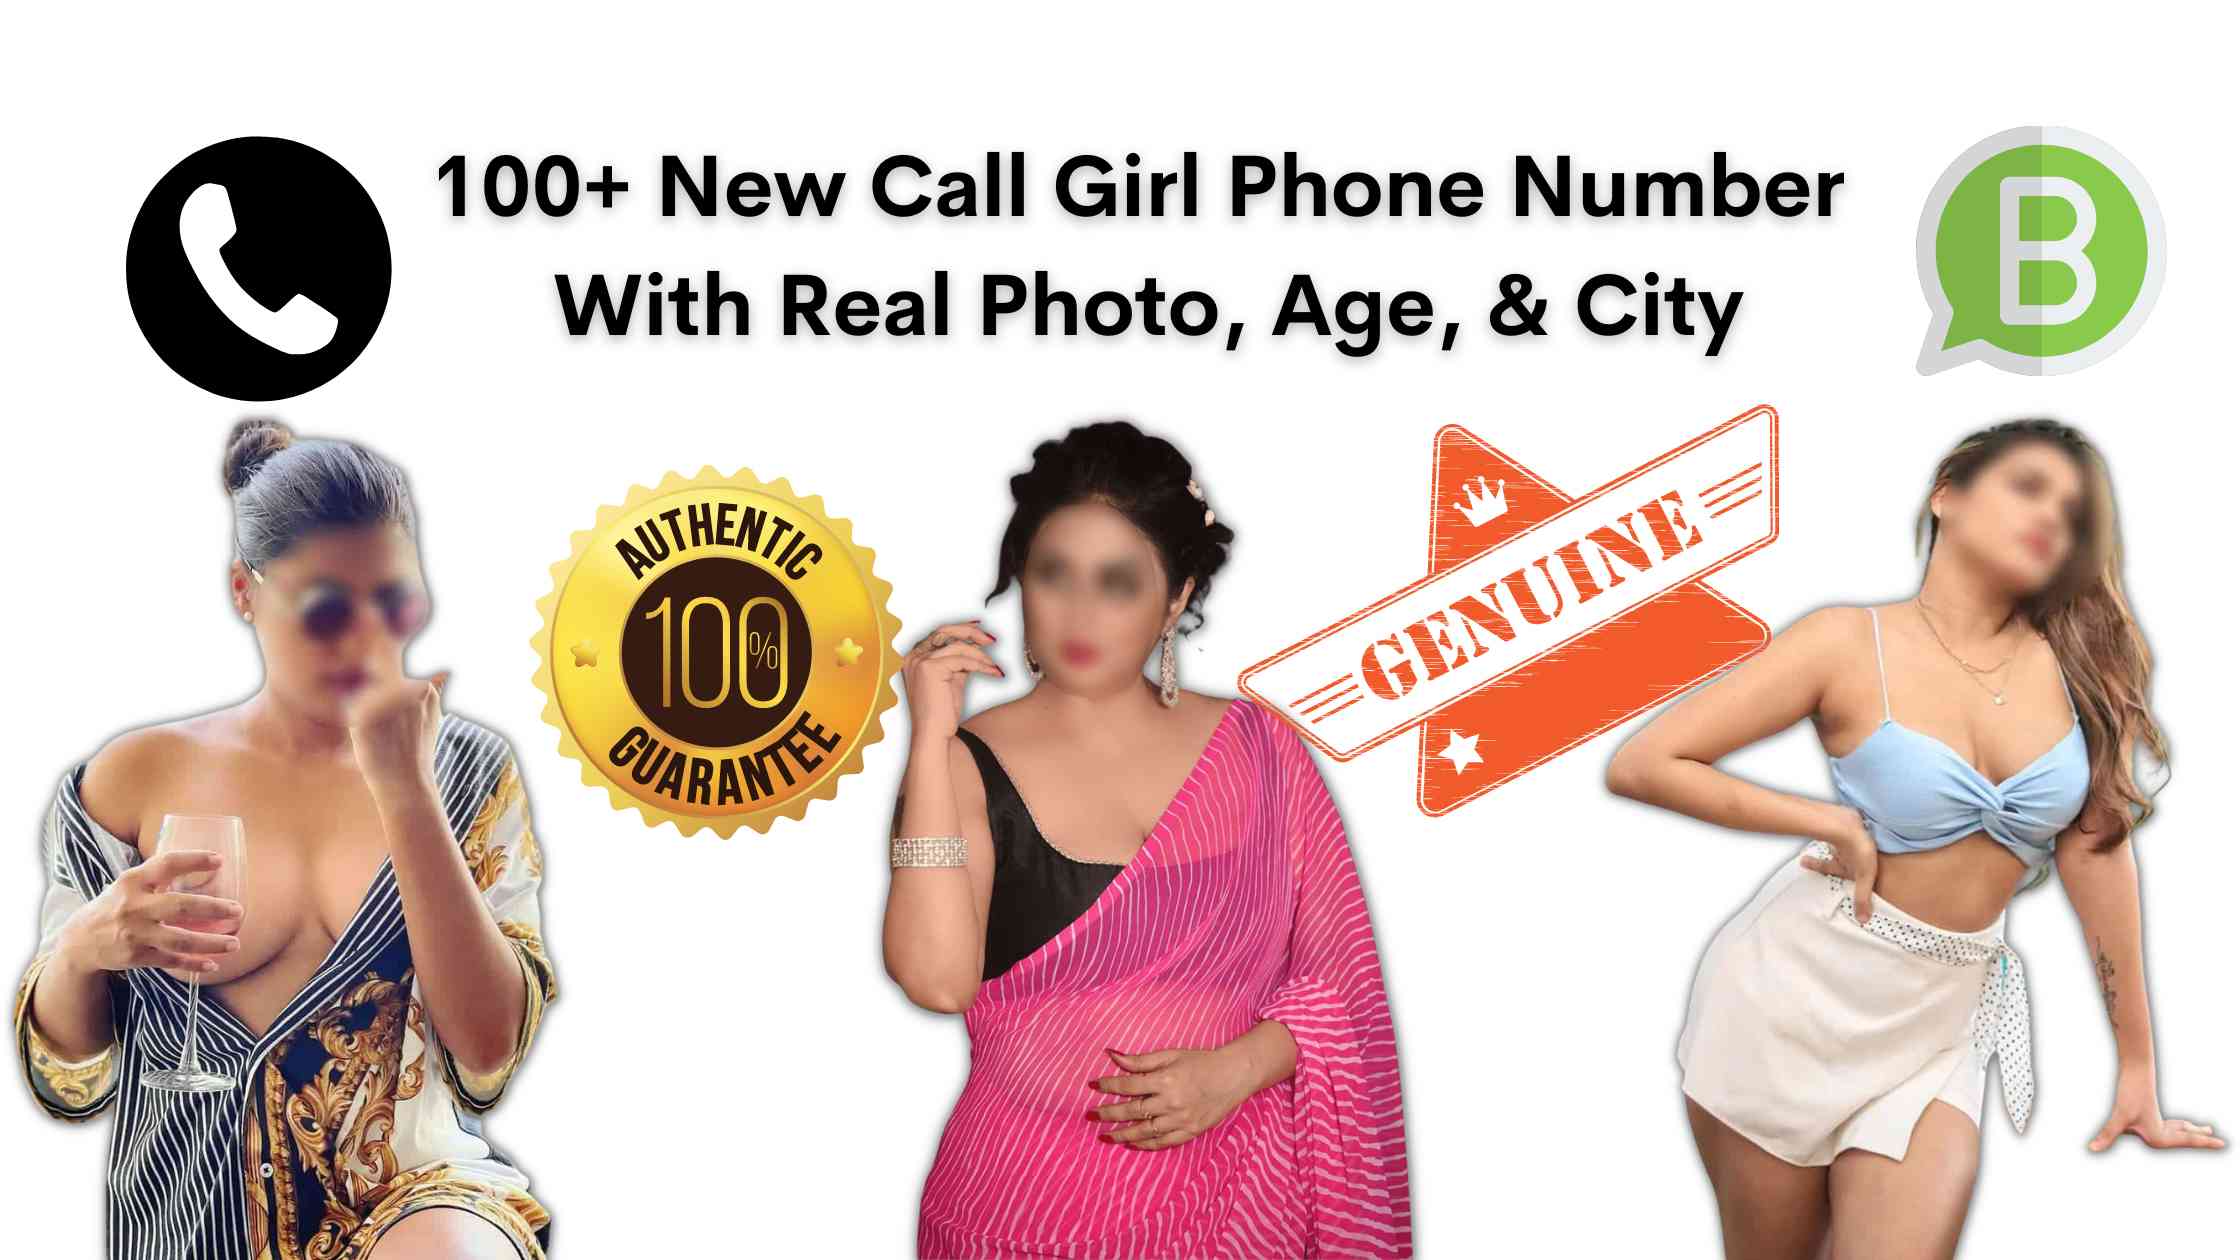 Real Call Girl Phone Number